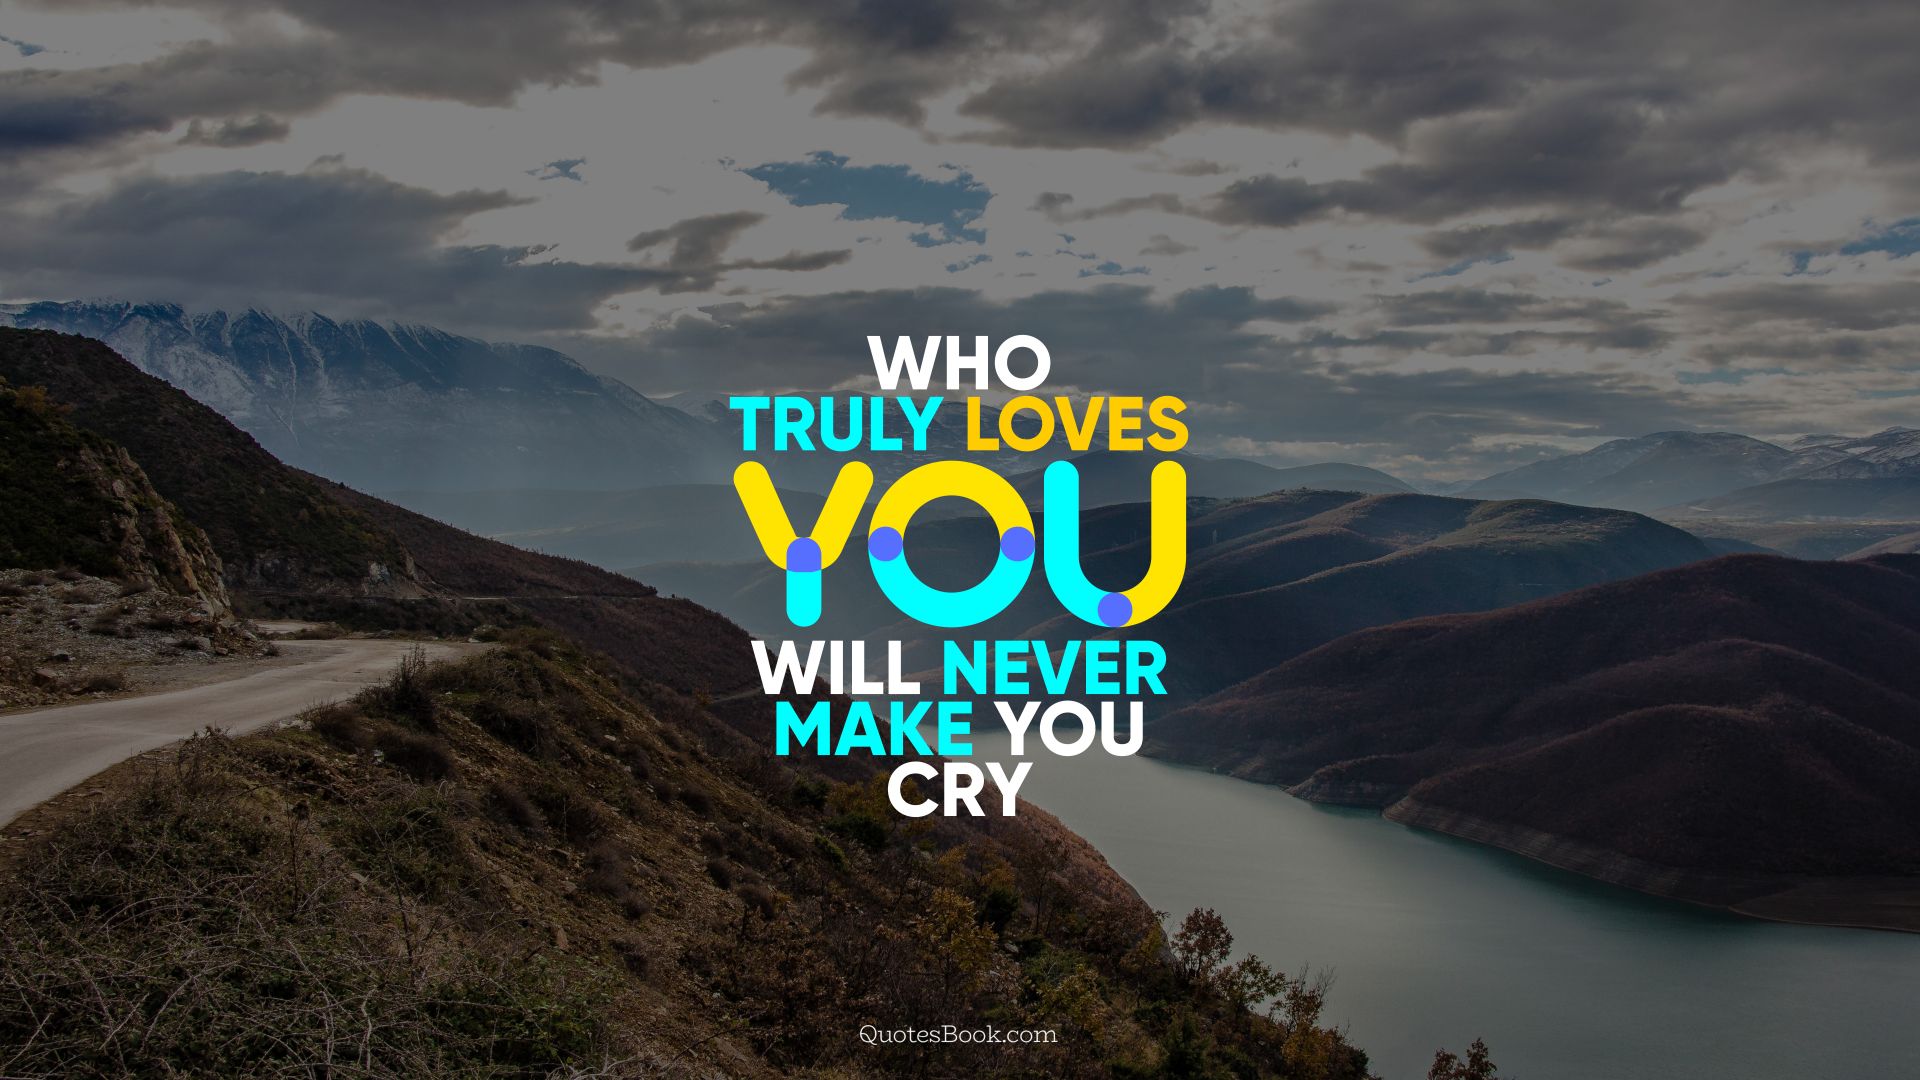 Who truly loves you, will never make you cry. - Quote by QuotesBook